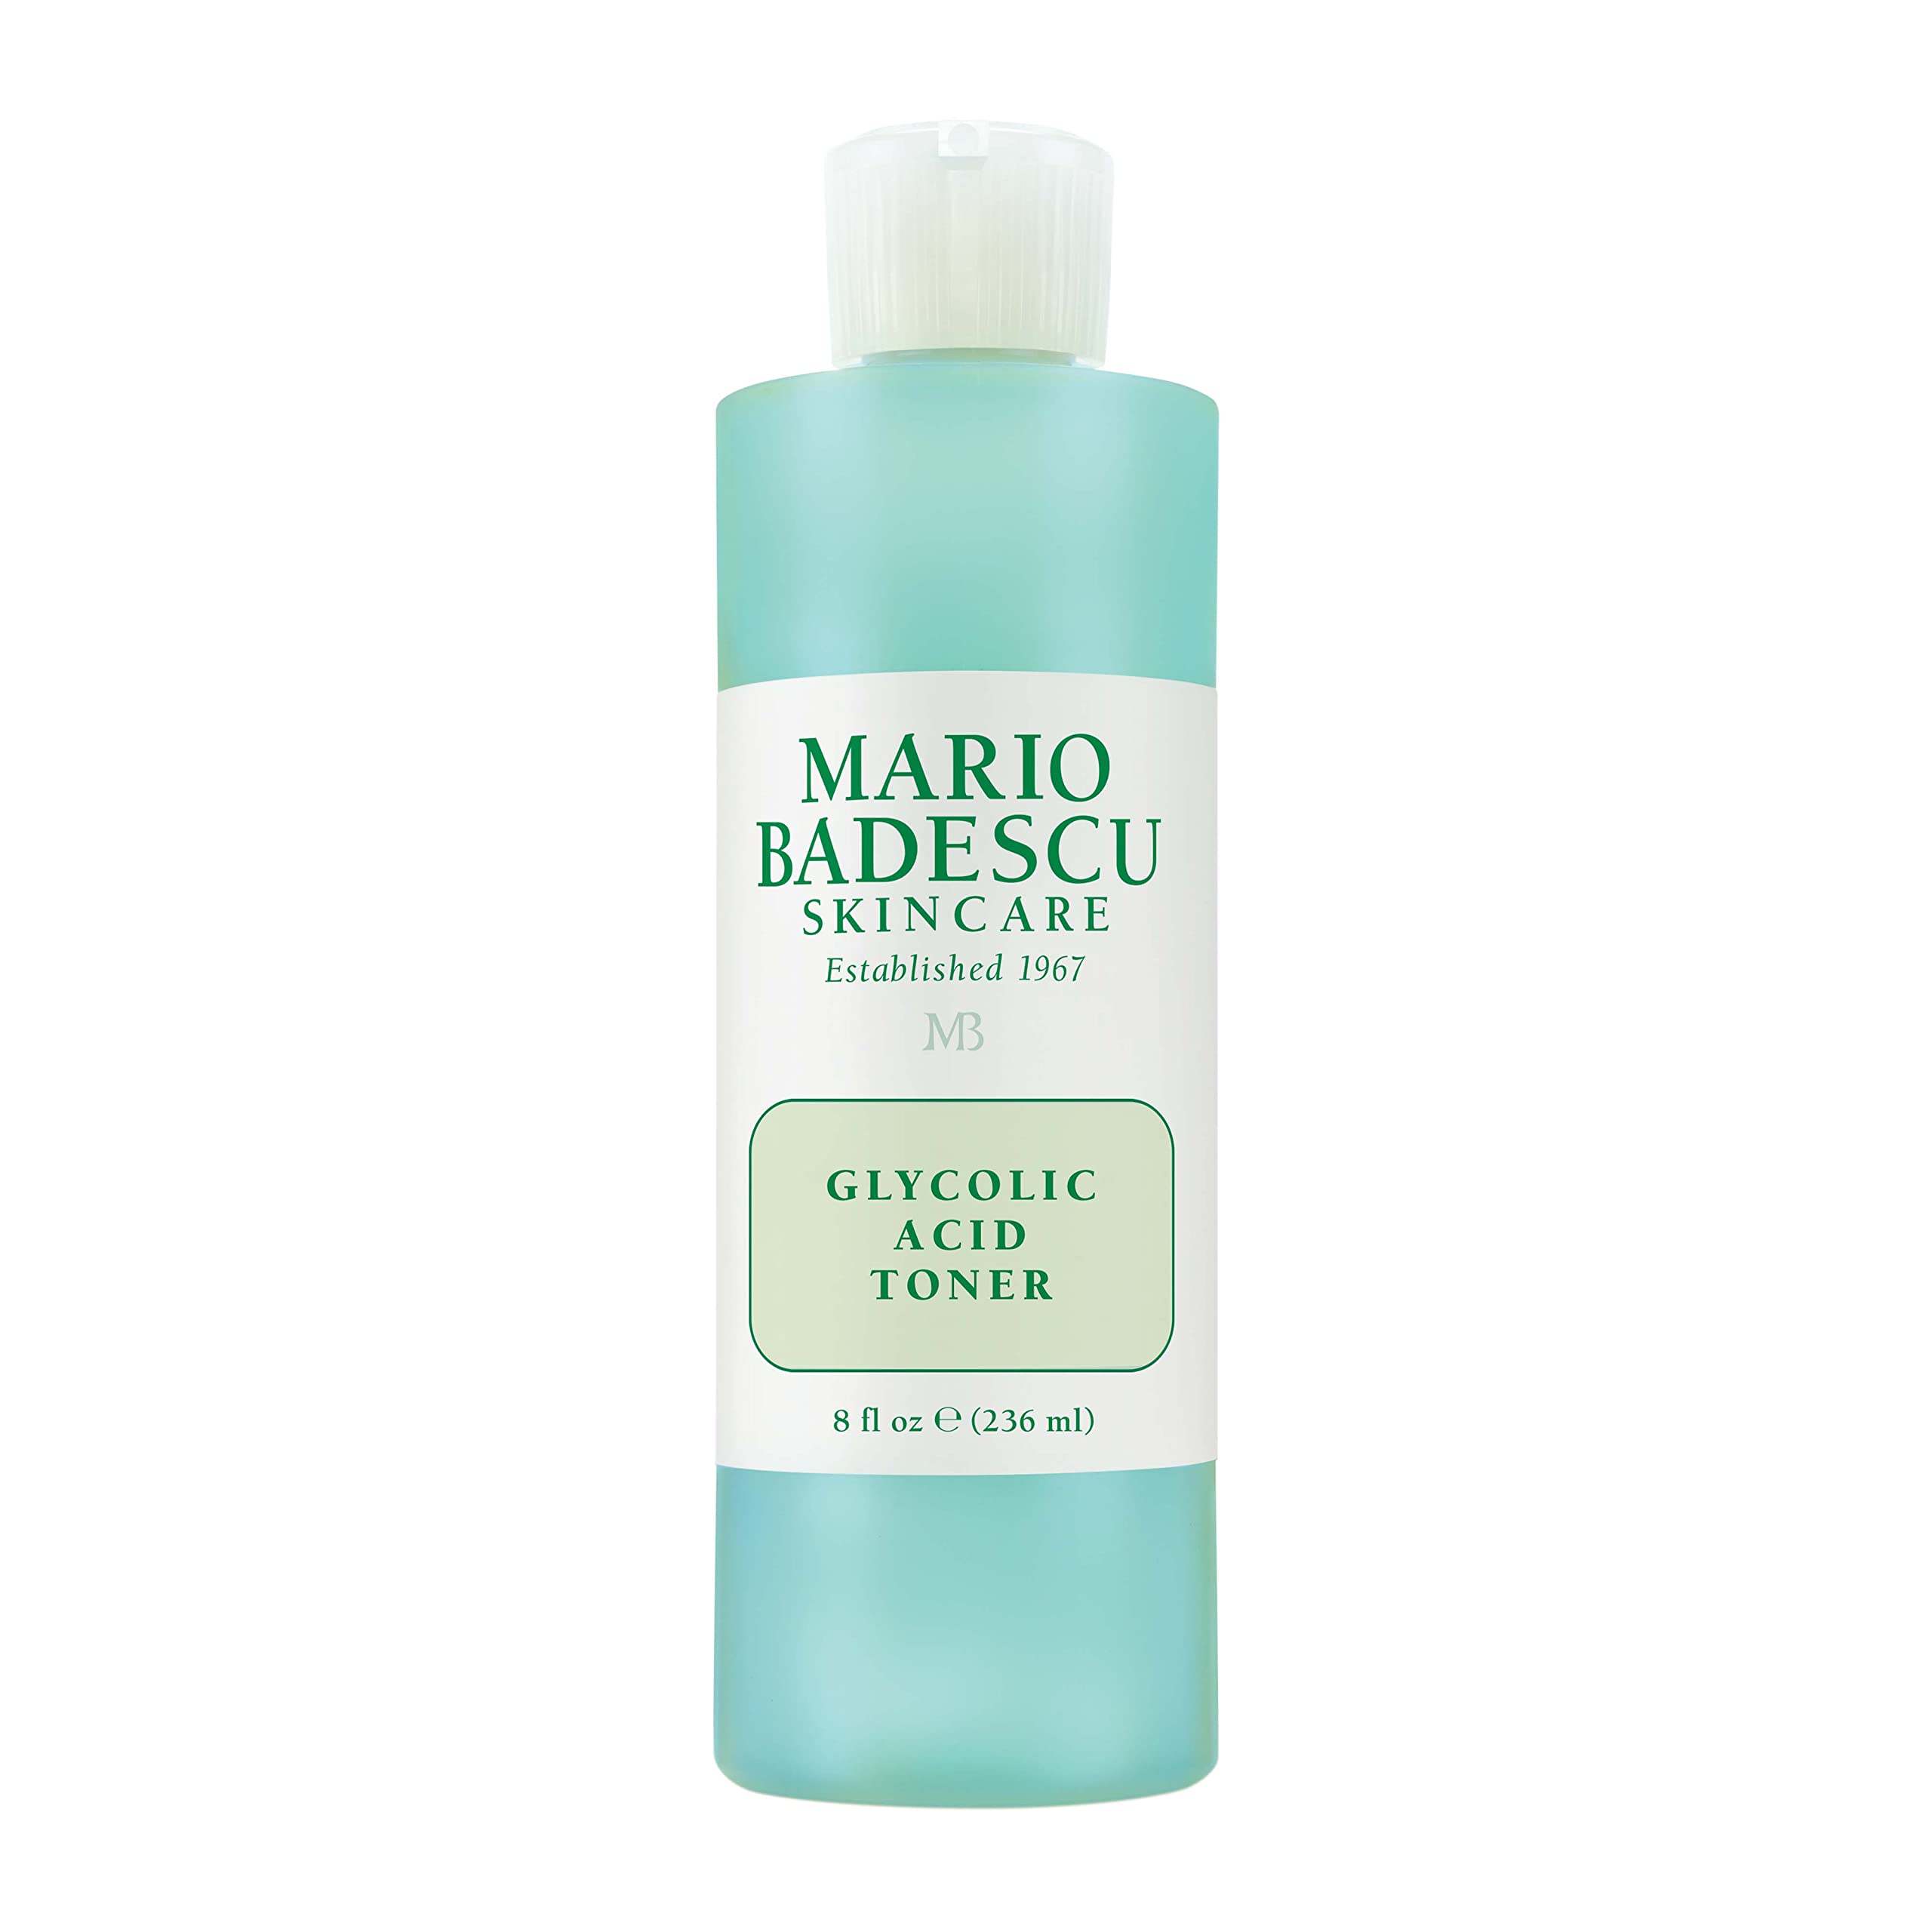 Mario Badescu Glycolic Acid Toner for Dry and Combination Skin, Alcohol-Free Facial Toner for Aging Skin, Formulated with Exfoliating Glycolic Acid & Antioxidant Grapefruit Extract